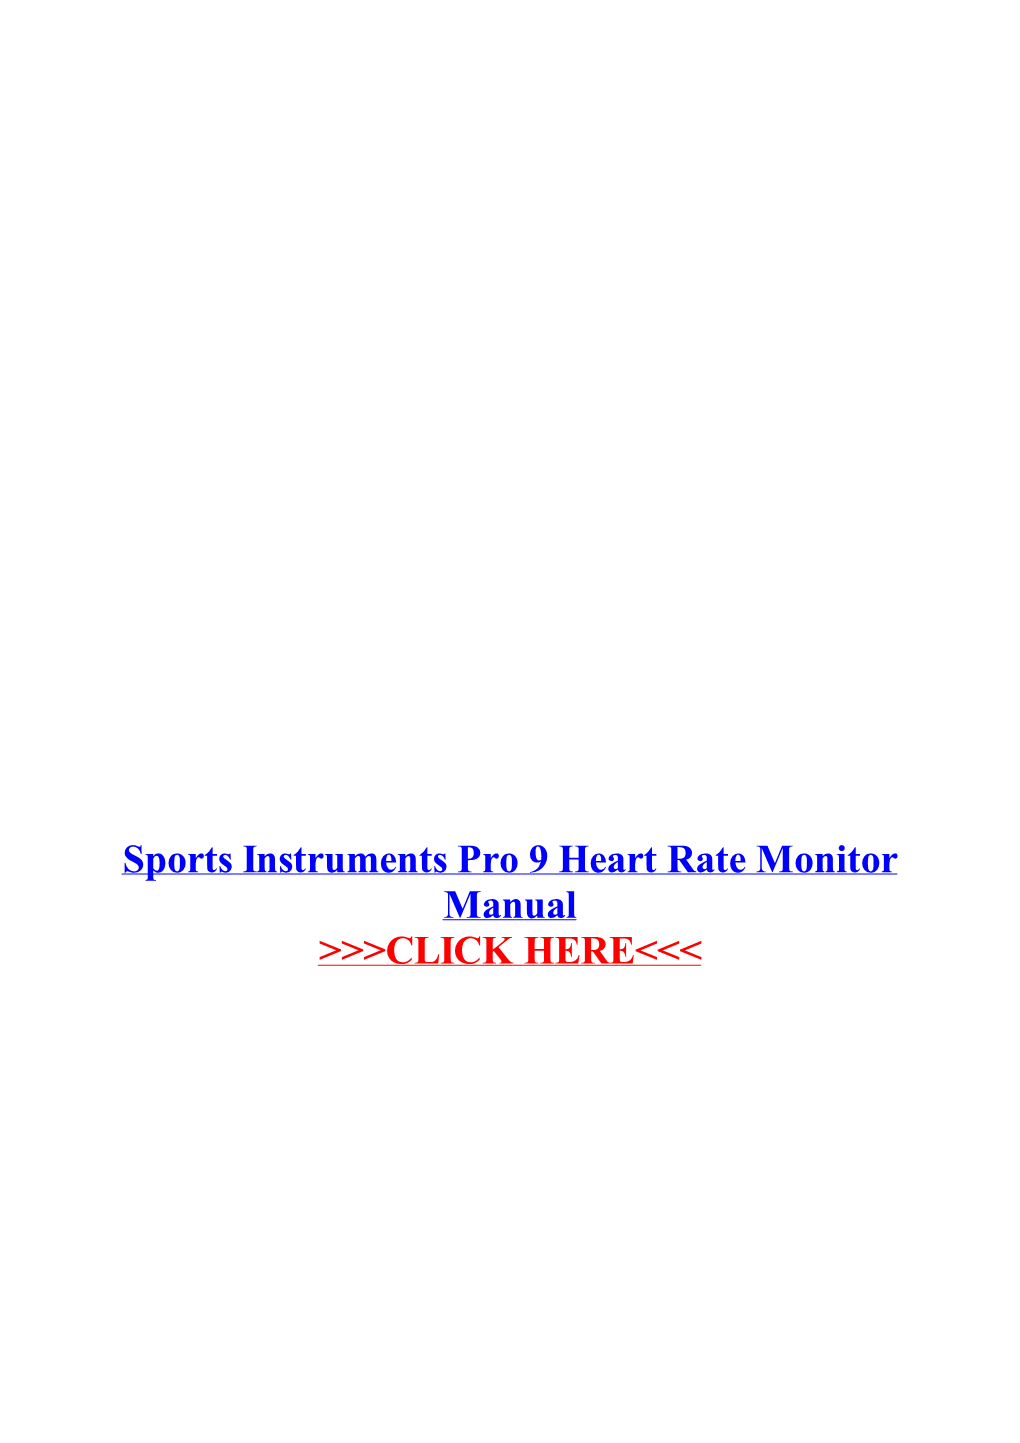 Sports Instruments Pro 9 Heart Rate Monitor Manual